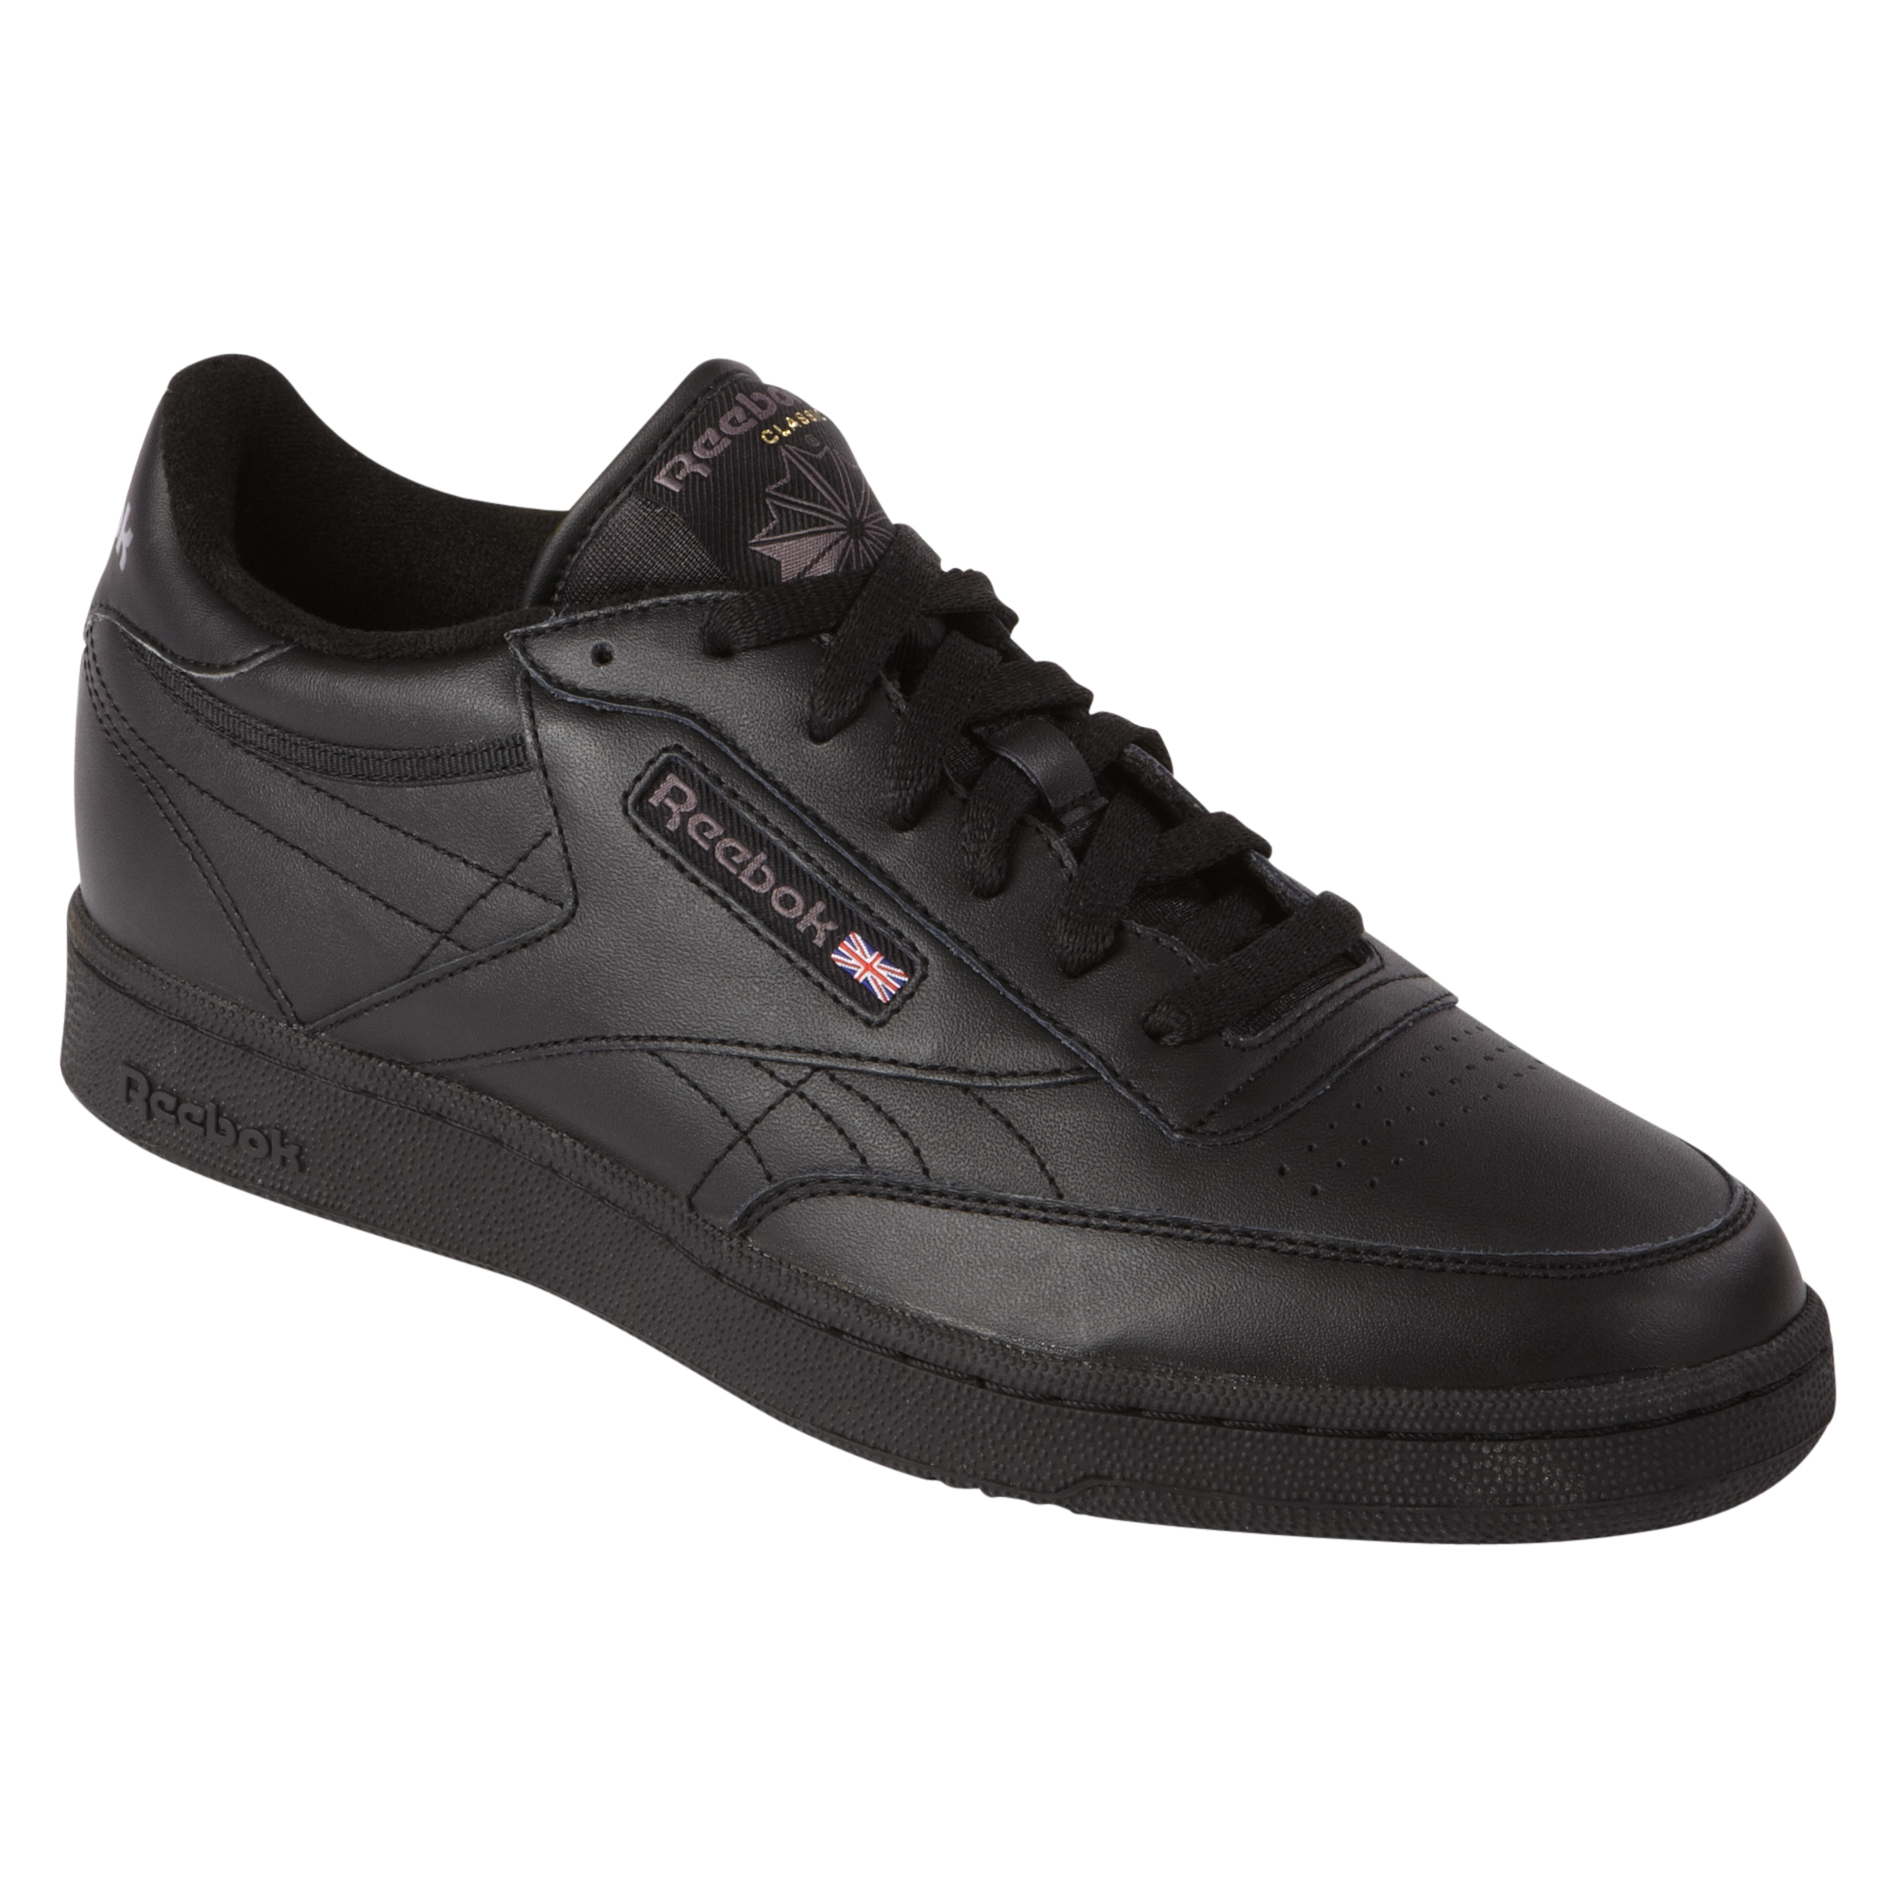 Men's Classic Club-C Black Casual Athletic Shoe -Extra Wide Width